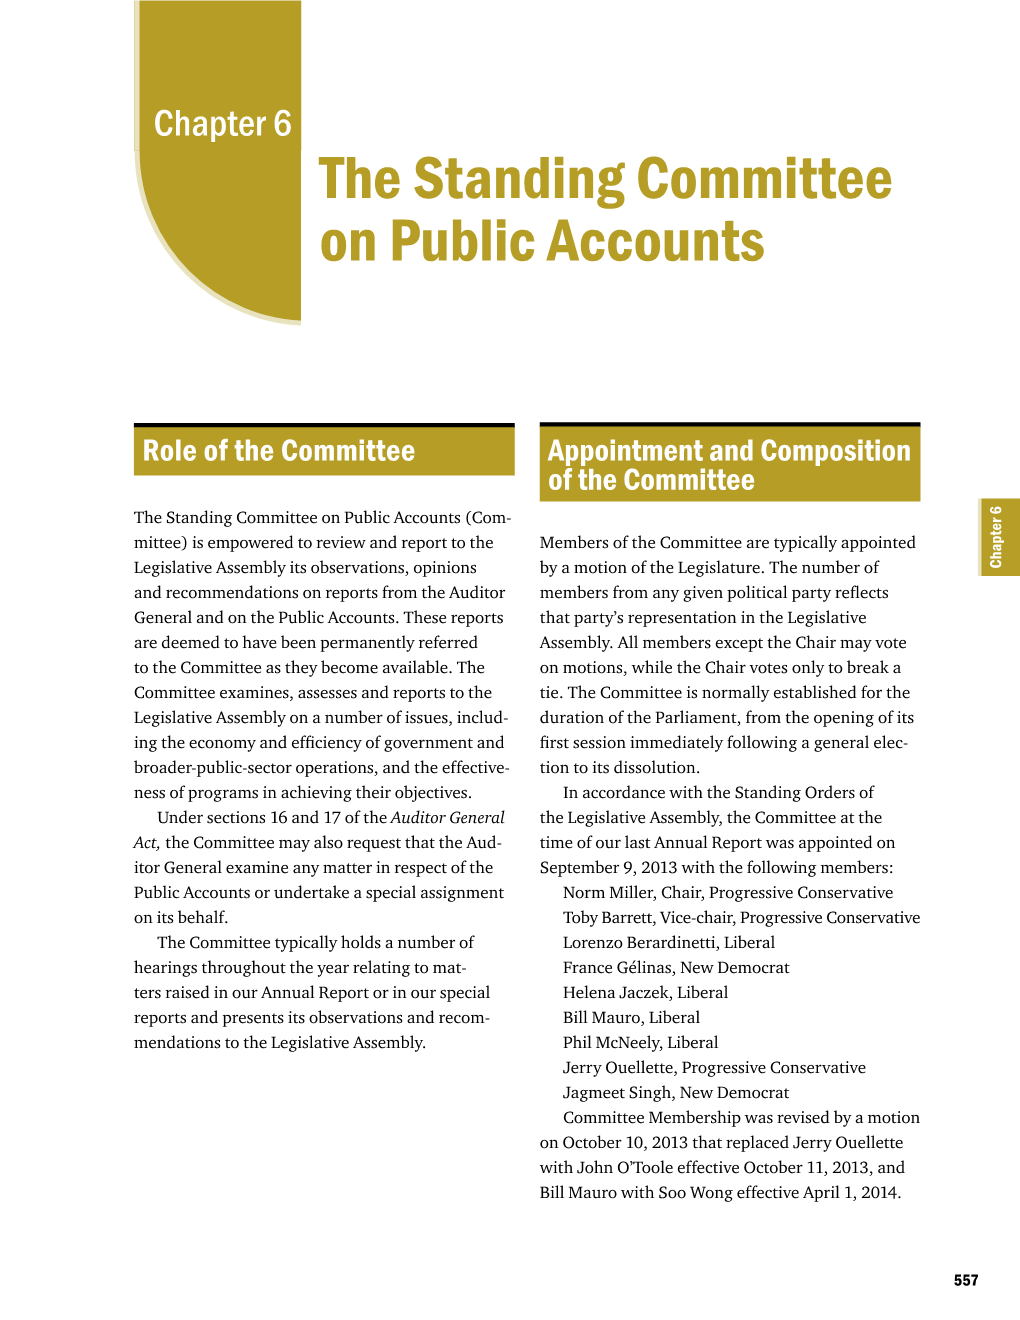 Chapter 6: the Standing Committee on Public Accounts (Pdf 98Kb)